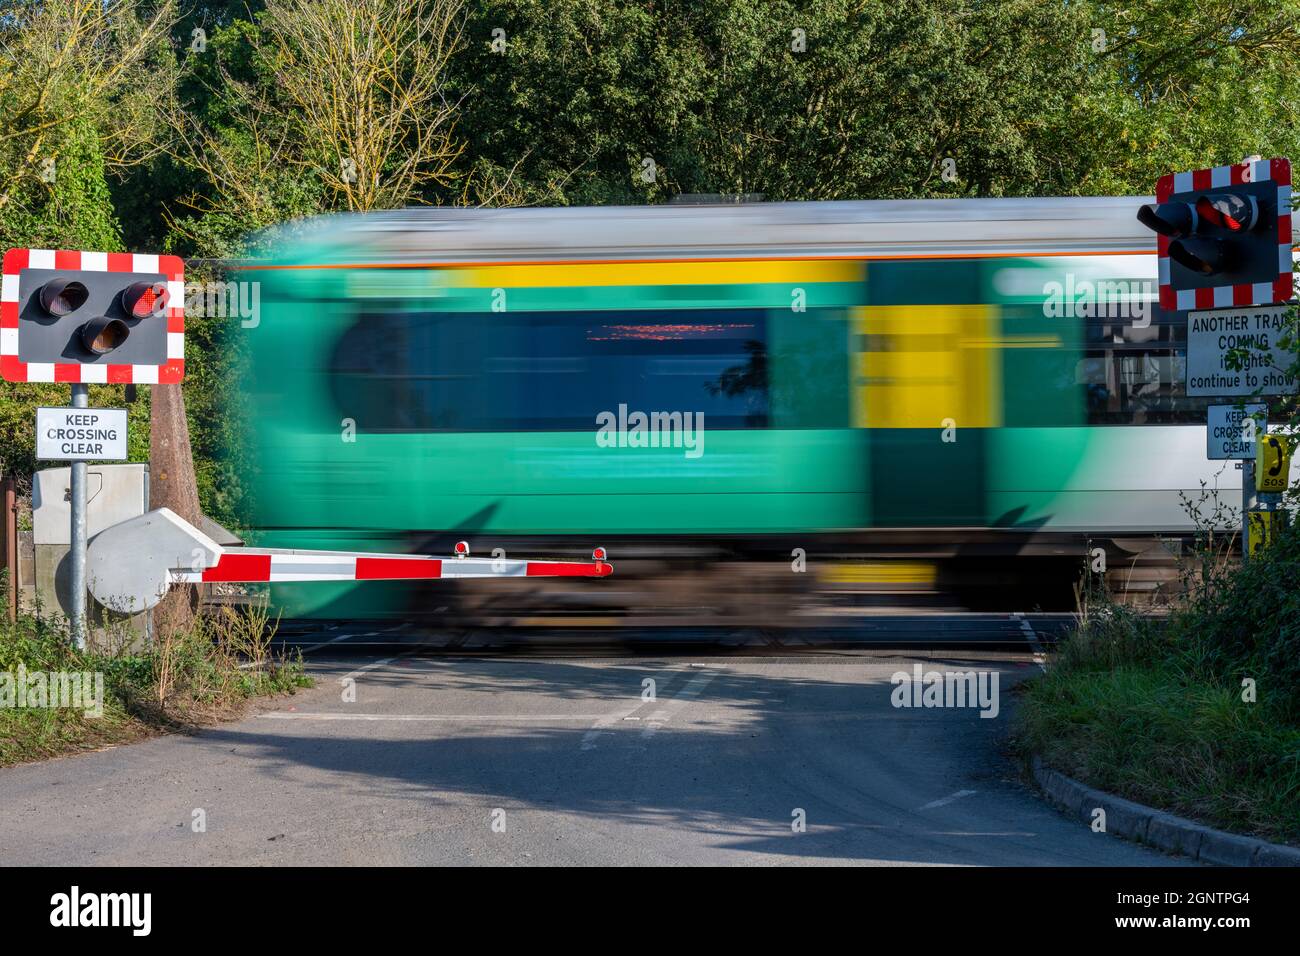 a train passing over a level crossing in west sussex. railway level crossing over a road with flashing red lights for crossing safety in sussex. Stock Photo